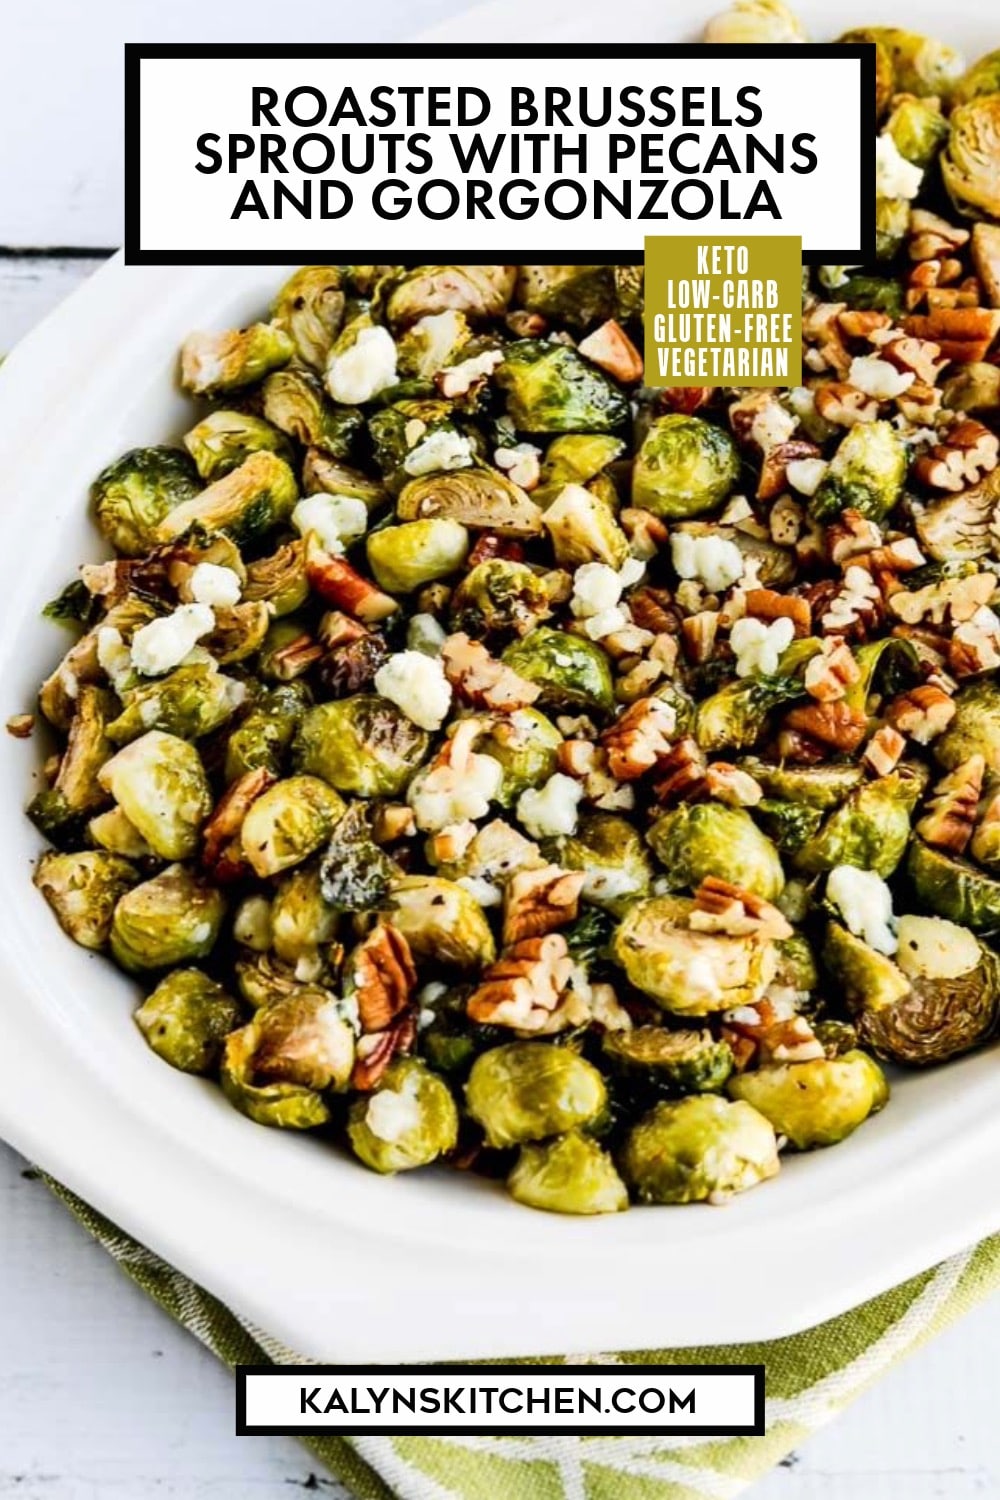 Pinterest image of Roasted Brussels Sprouts with Pecans and Gorgonzola